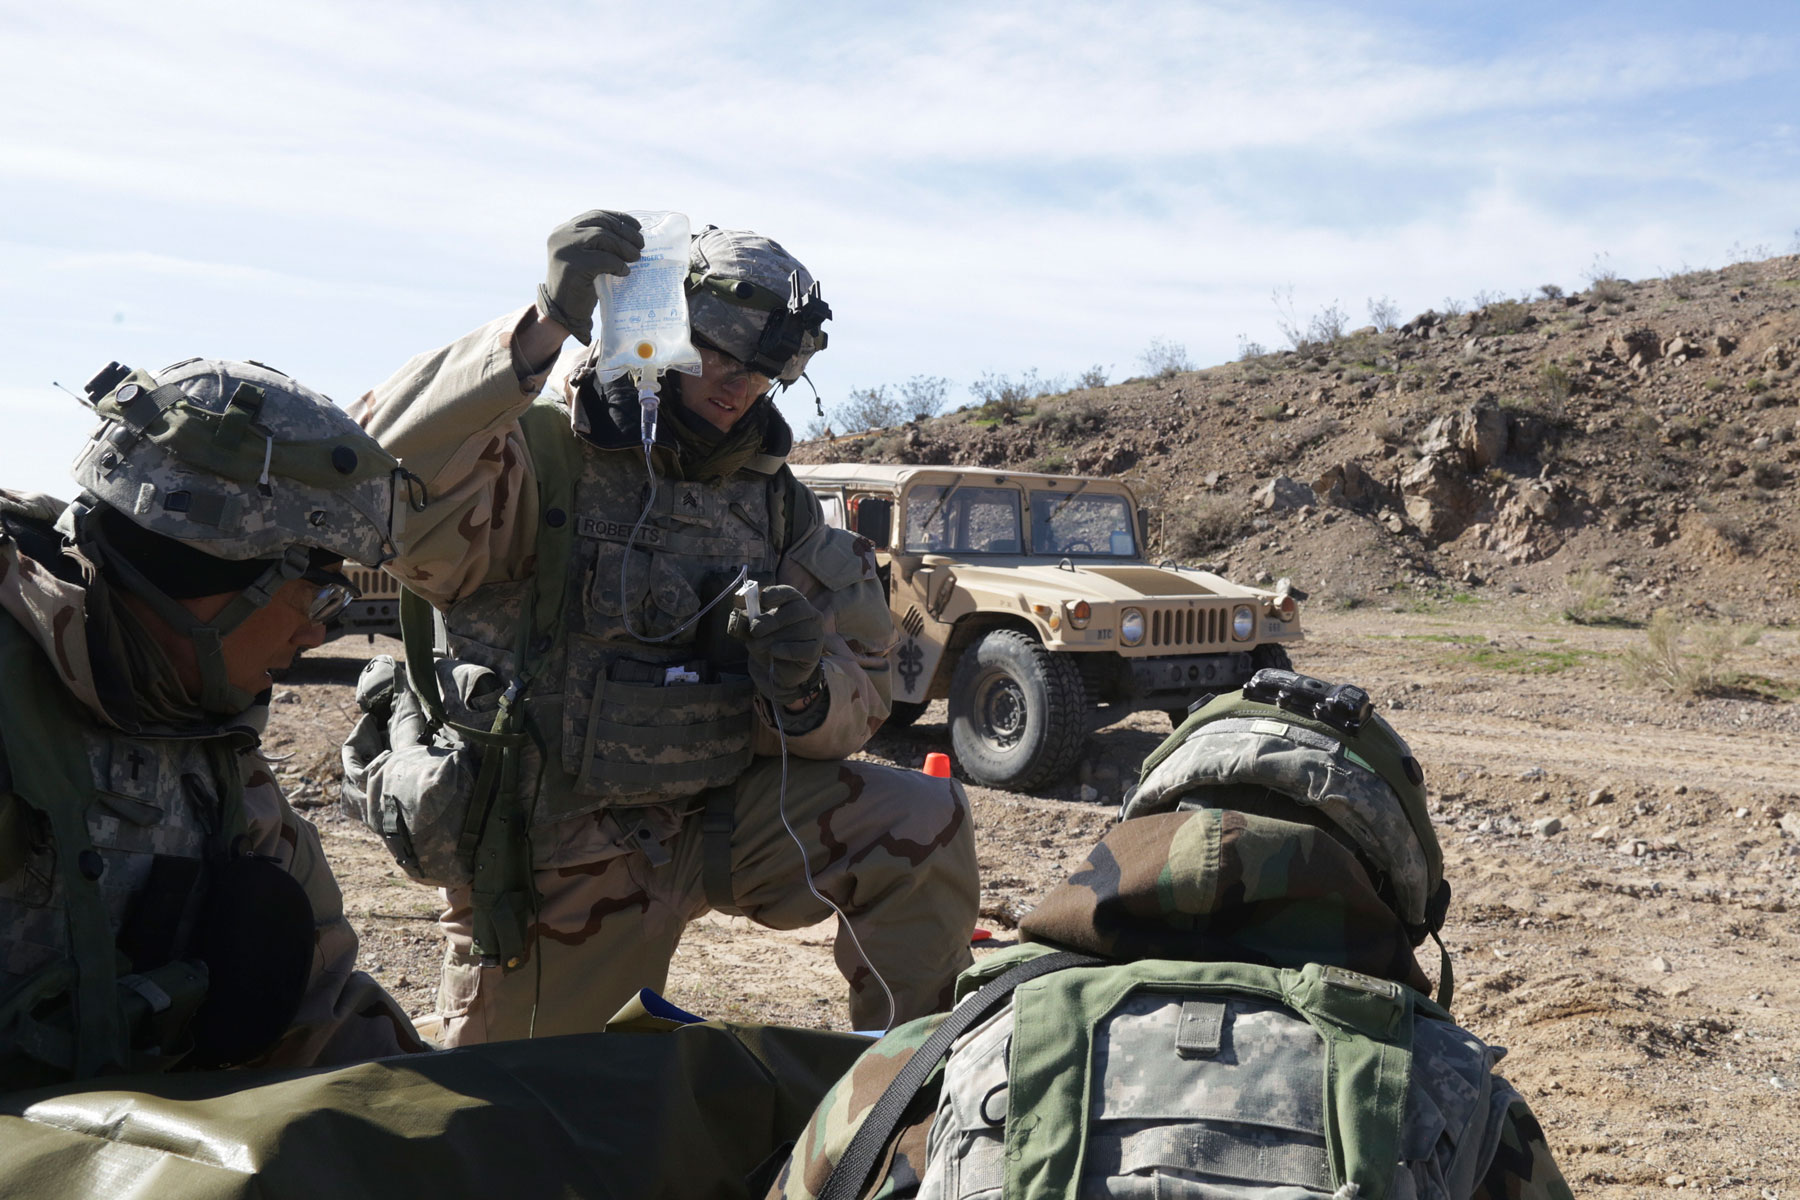 US soldiers assigned to 1st Squadron, 8th Cavalry Regiment, 2nd Brigade Combat Team, 1st Cavalry Division, care for simulated casualties during Decisive Action Rotation 17-04 at the National Training Center in Fort Irwin, California, 2017